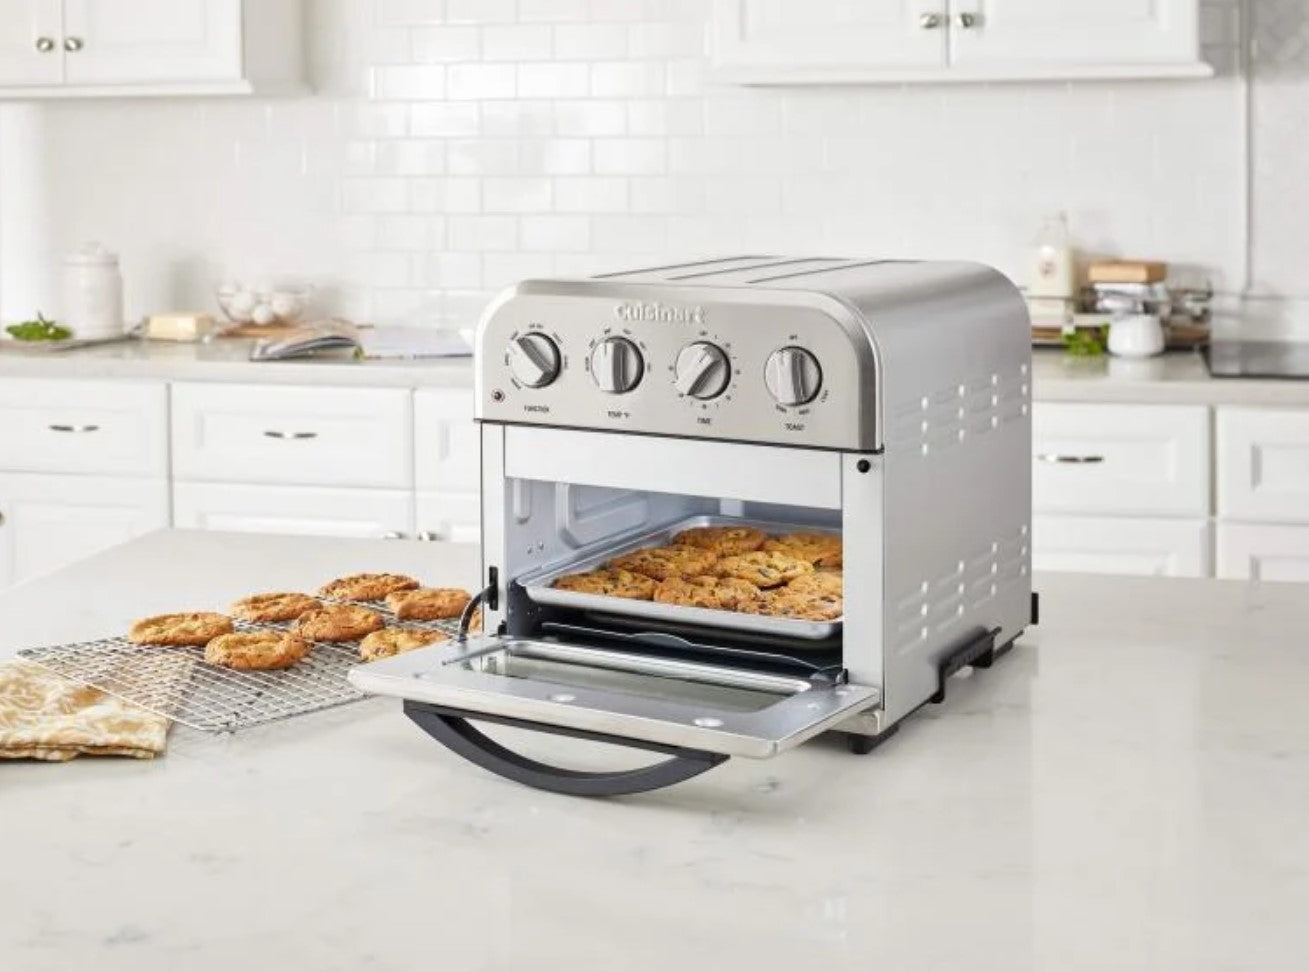 Cuisinart TOA-28FR Compact Air Fryer Toaster Oven, Silver - Certified Refurbished